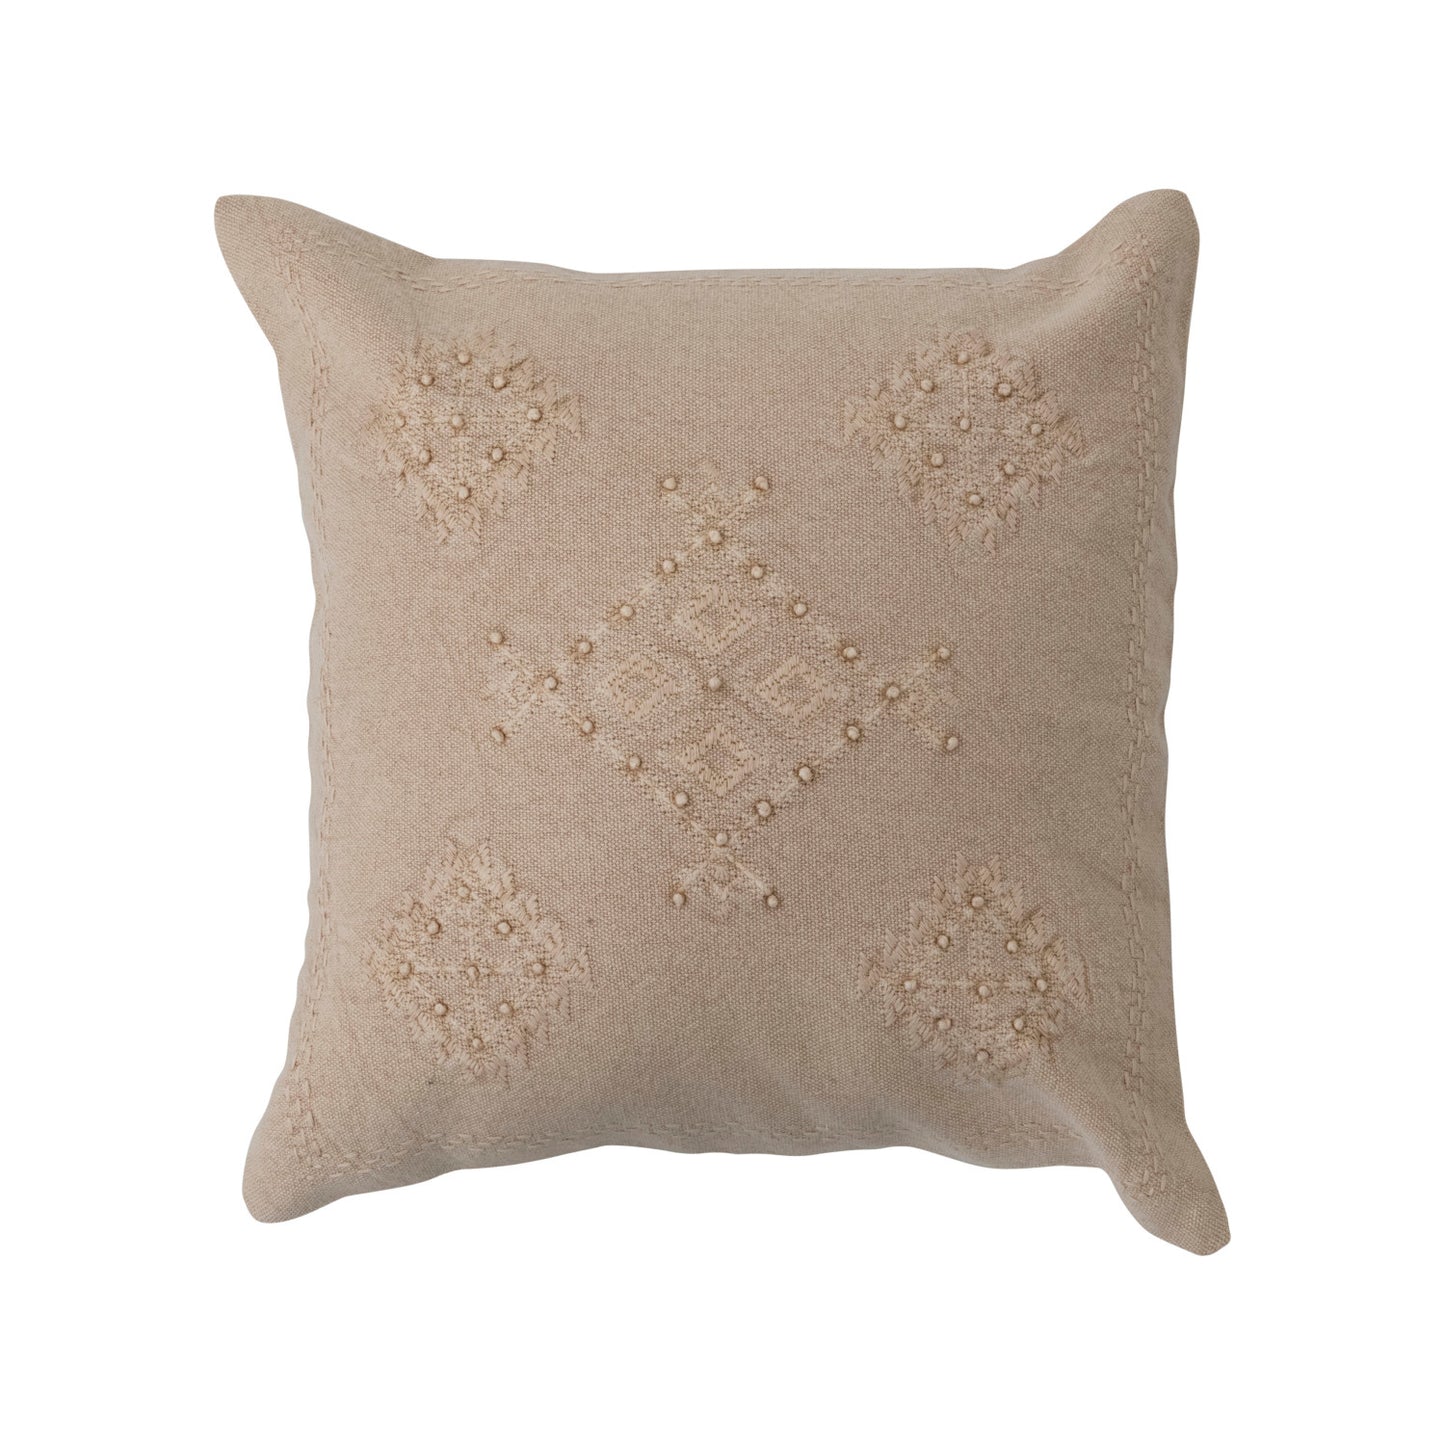 18" Woven Cotton Pillow w/ Embroidery & French Knots